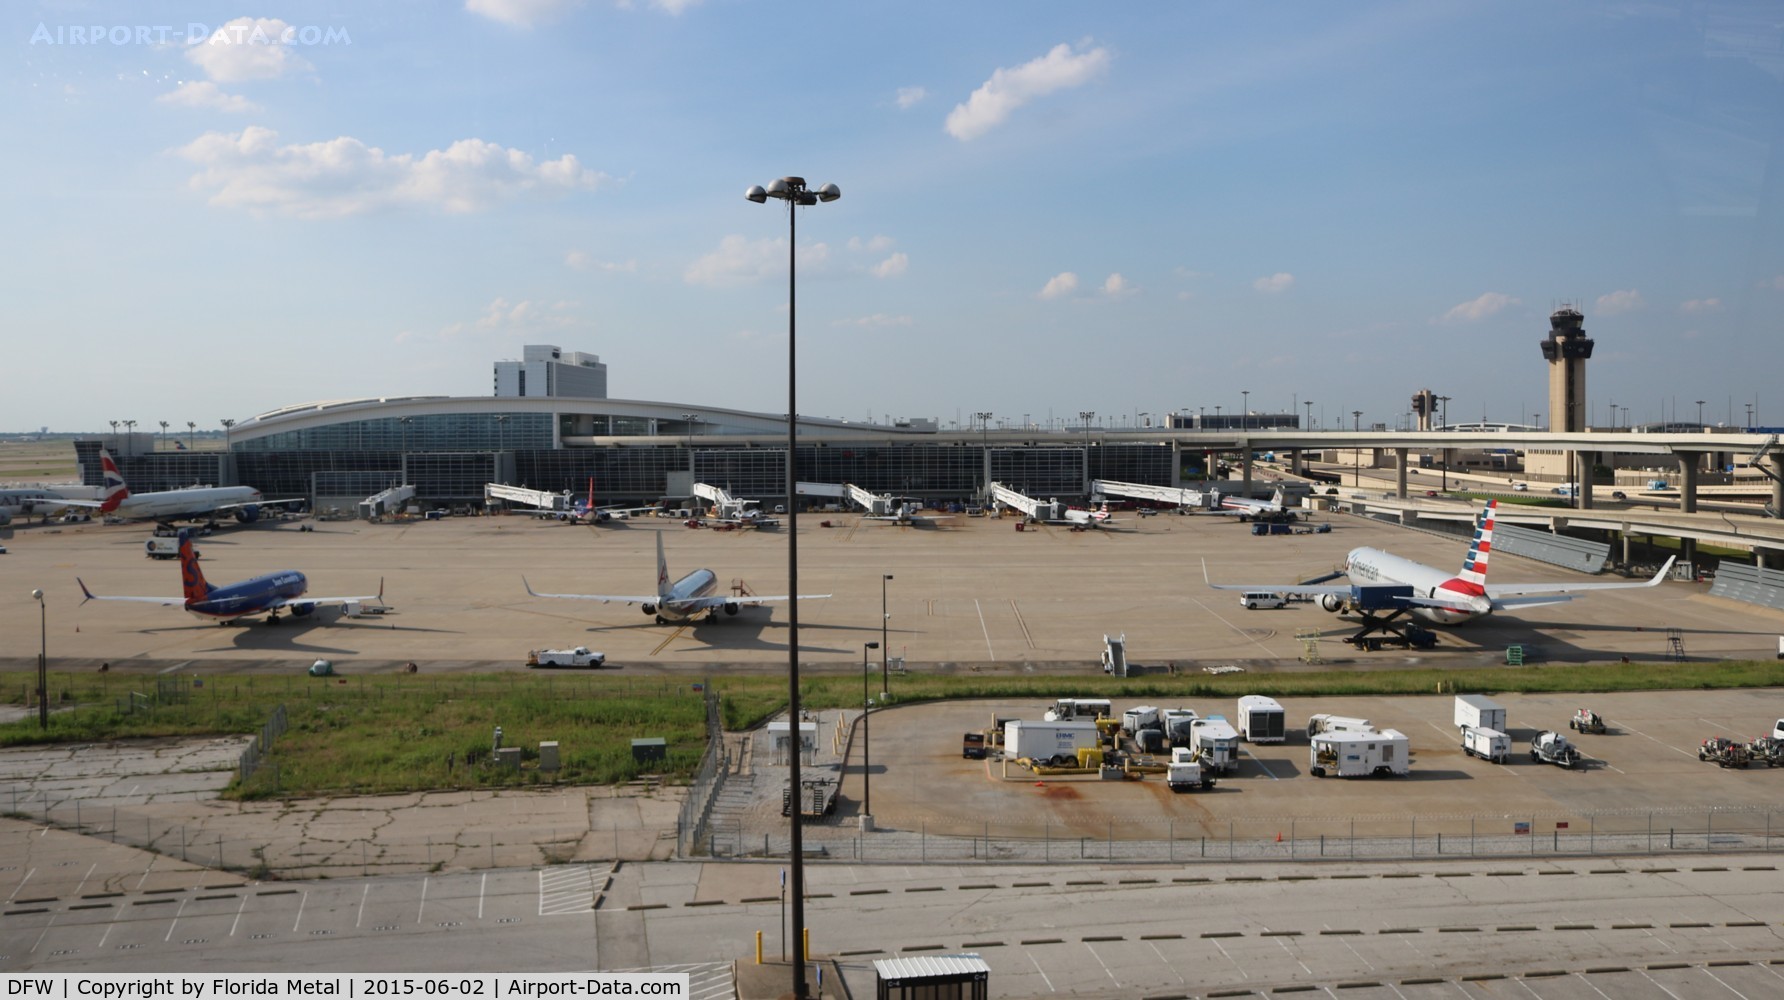 Dallas/fort Worth International Airport (DFW) - Dallas from the Air train